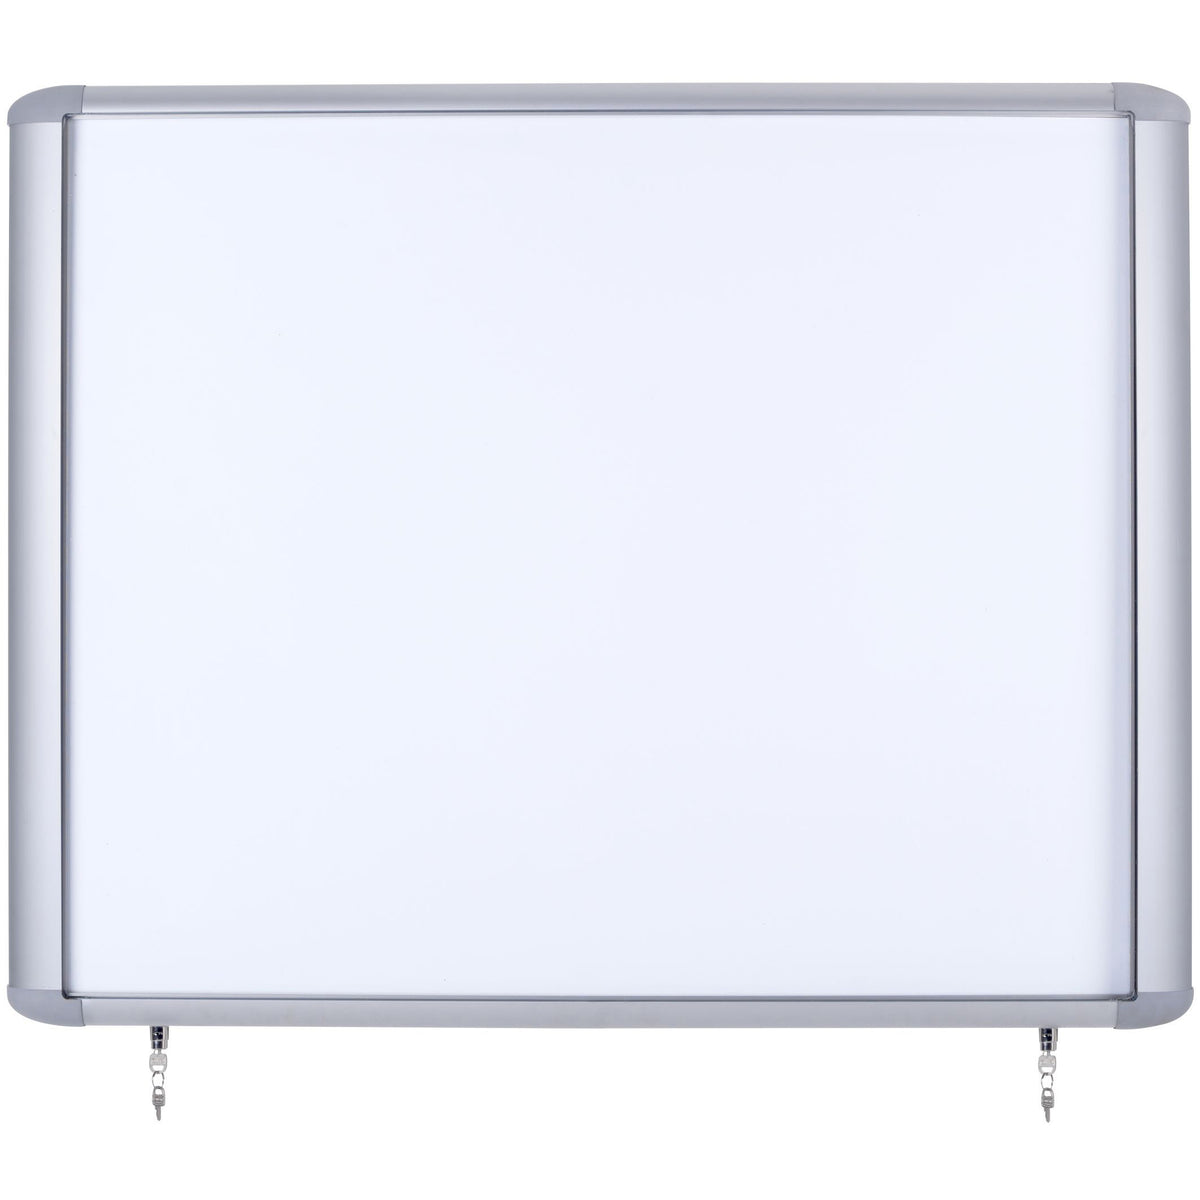 VT380609760 Outdoor Enclosed Top Hinged Door Locking Magnetic Dry Erase Board, Weather Resistant Wall Mounting Whiteboard, 39" x 48", Aluminum Frame by MasterVision